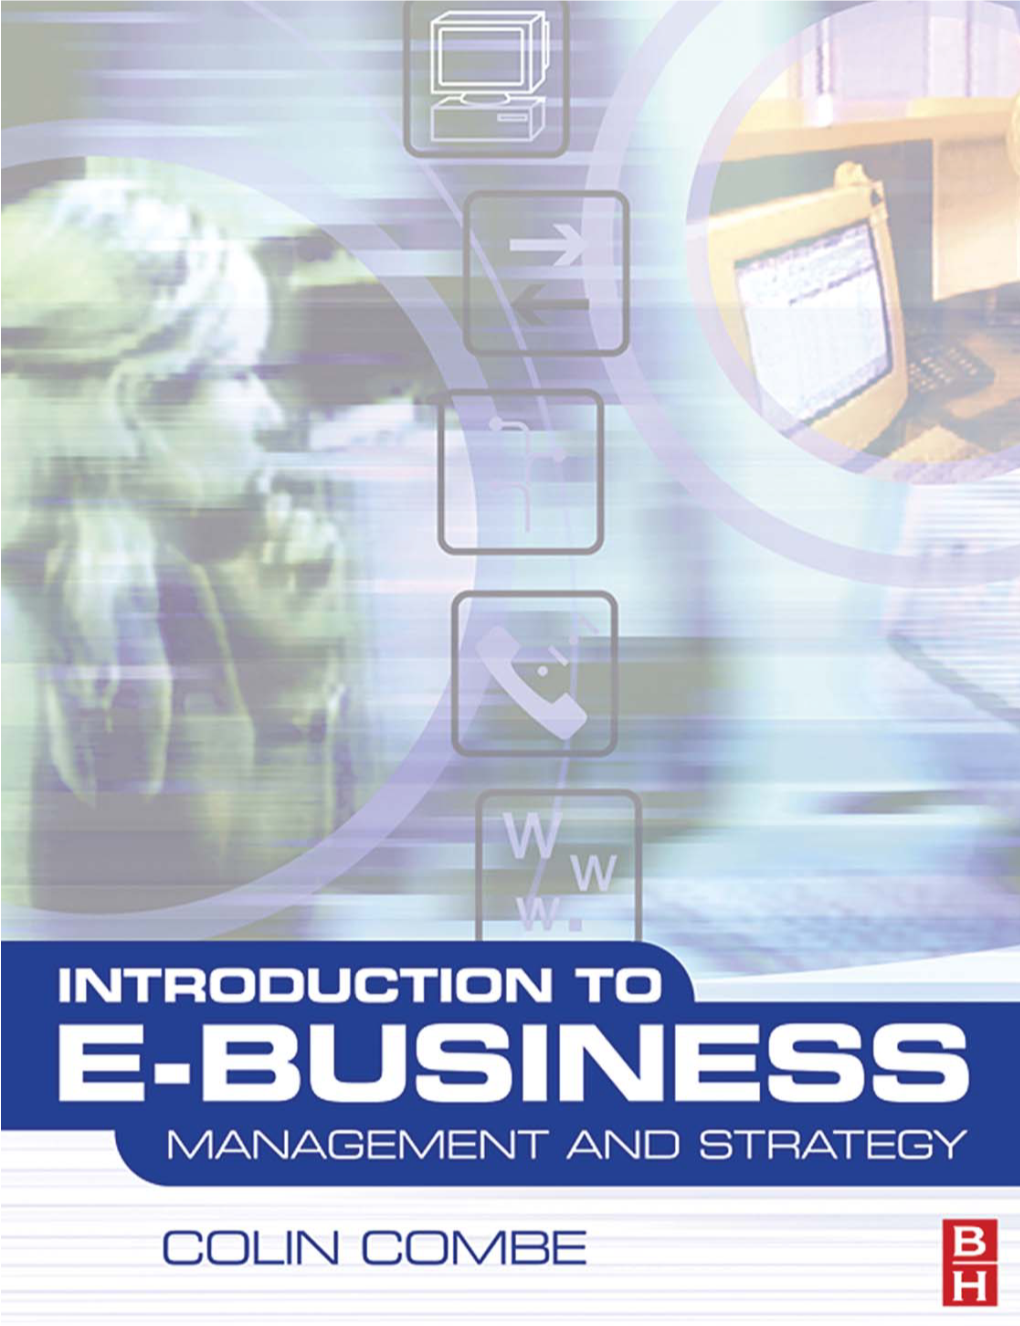 Introduction to E-Business: Management and Strategy